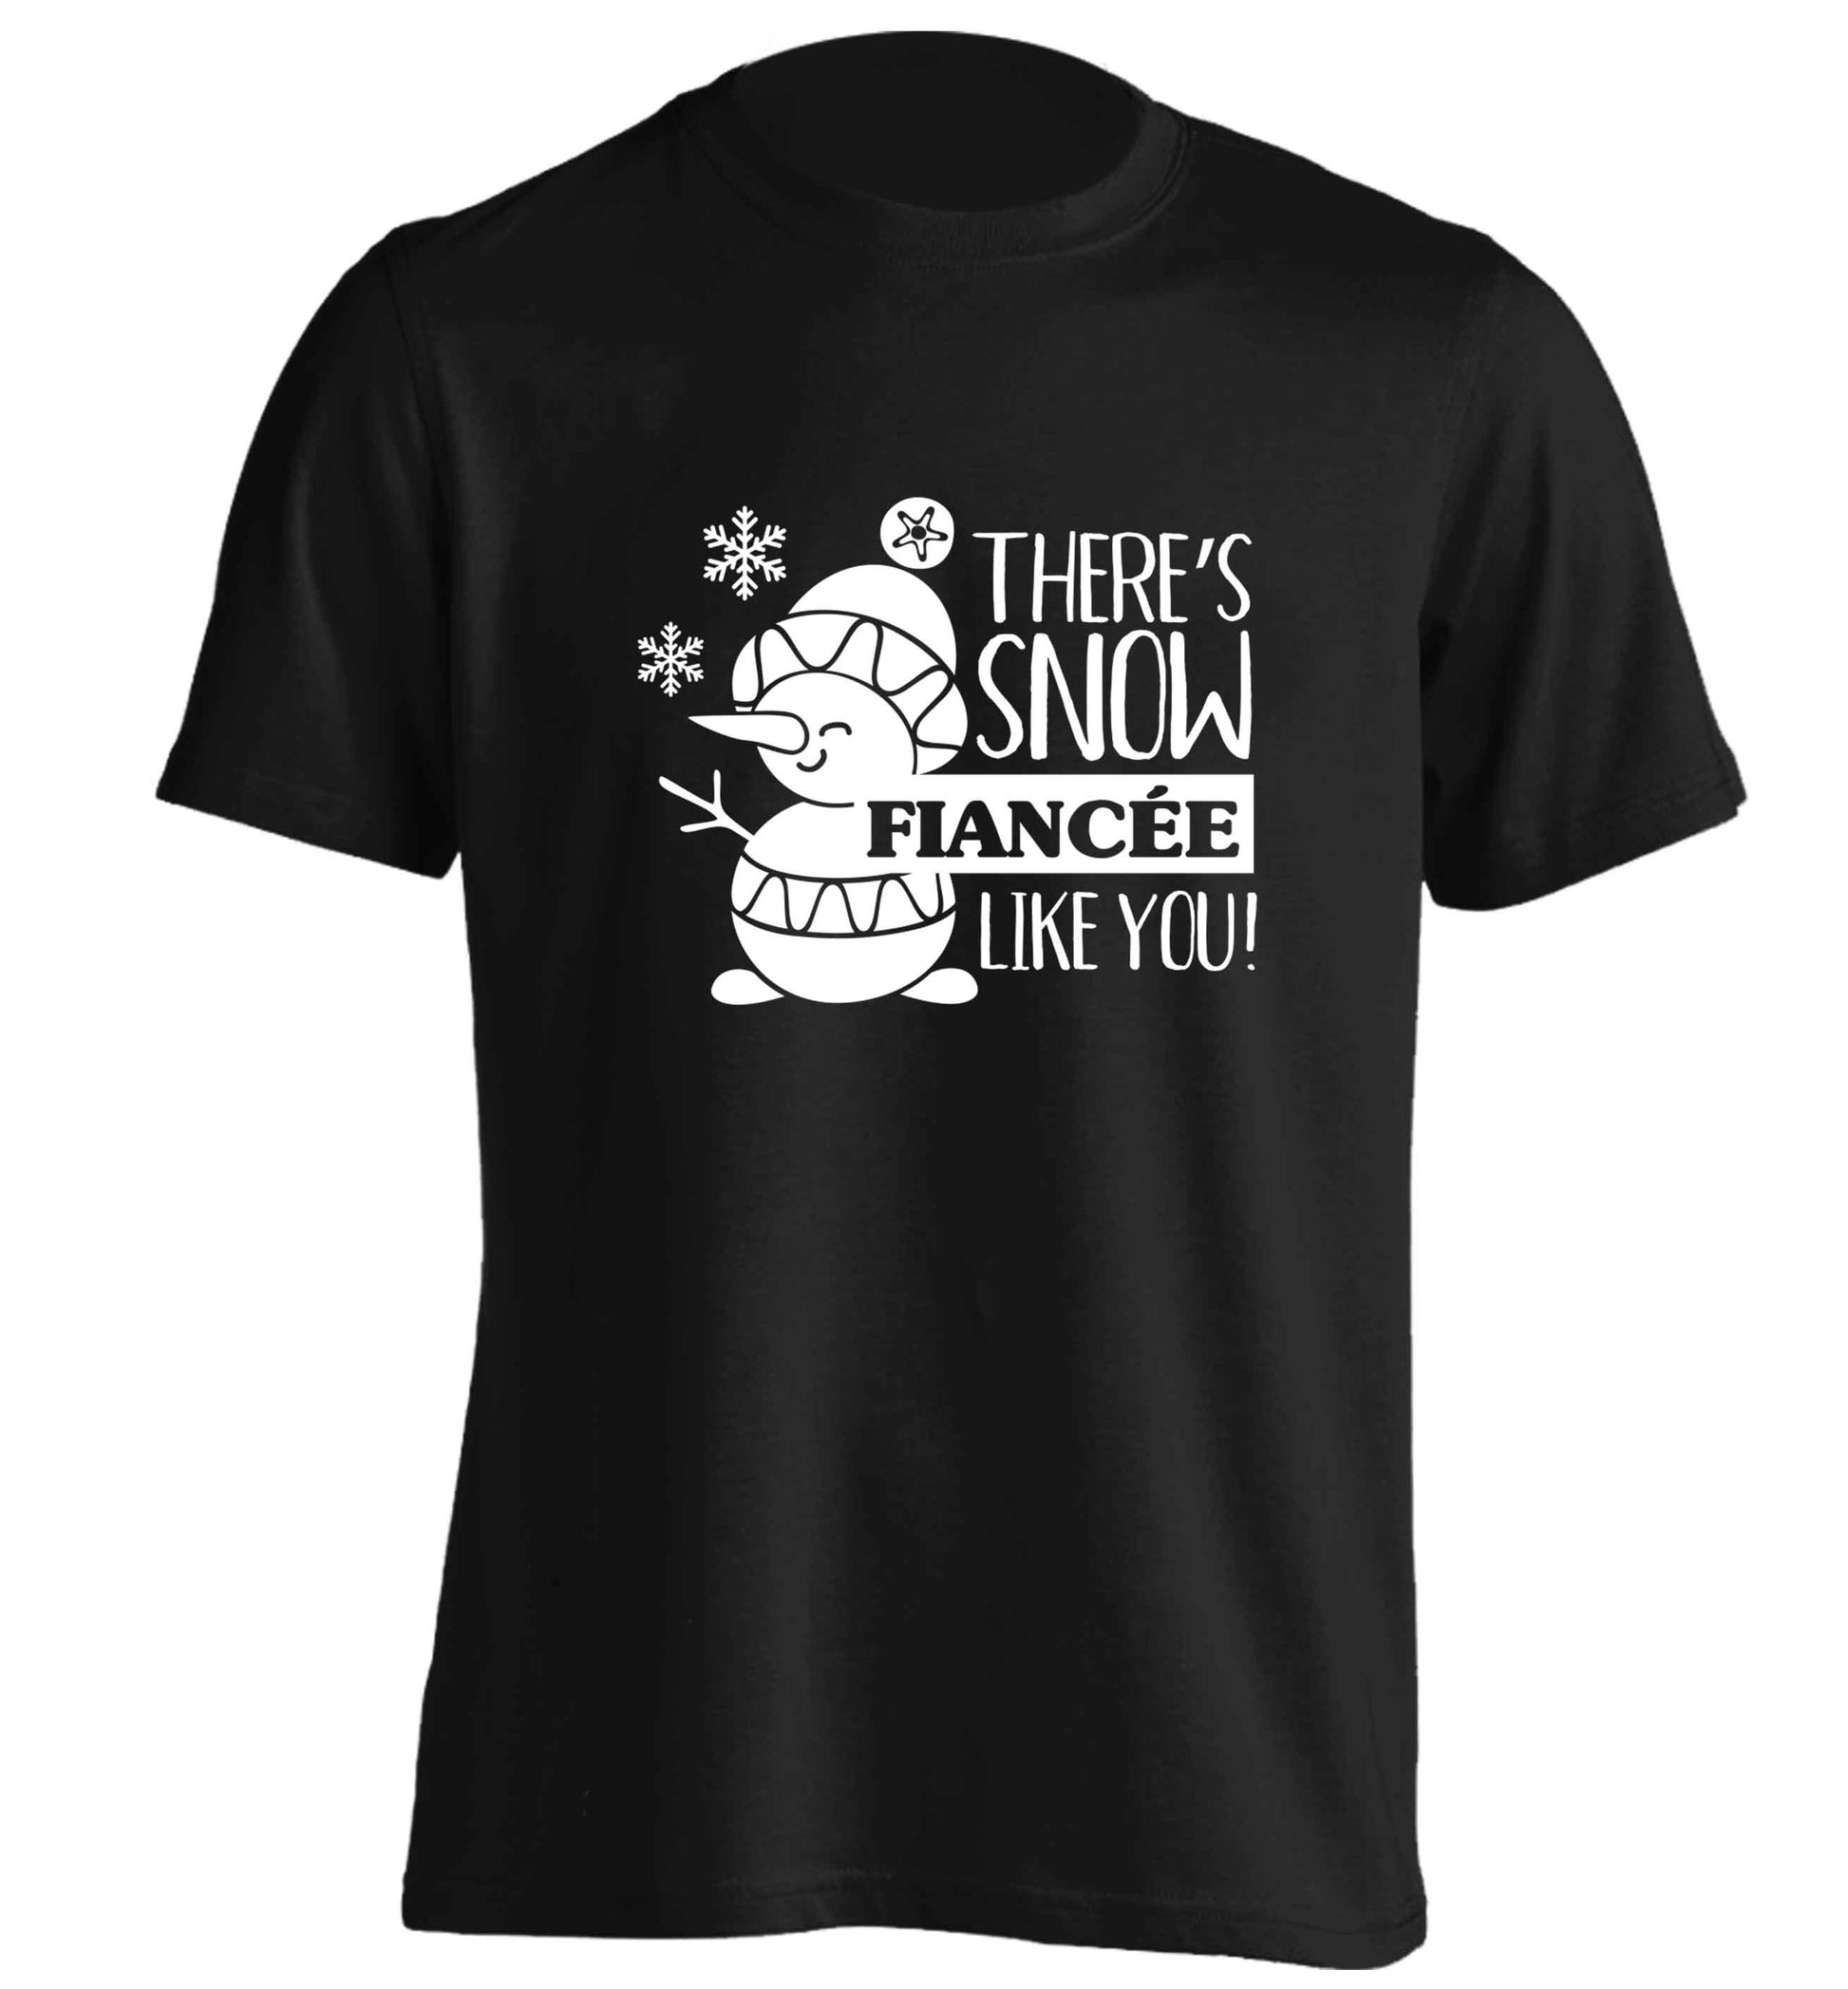 There's snow fiancee like you adults unisex black Tshirt 2XL